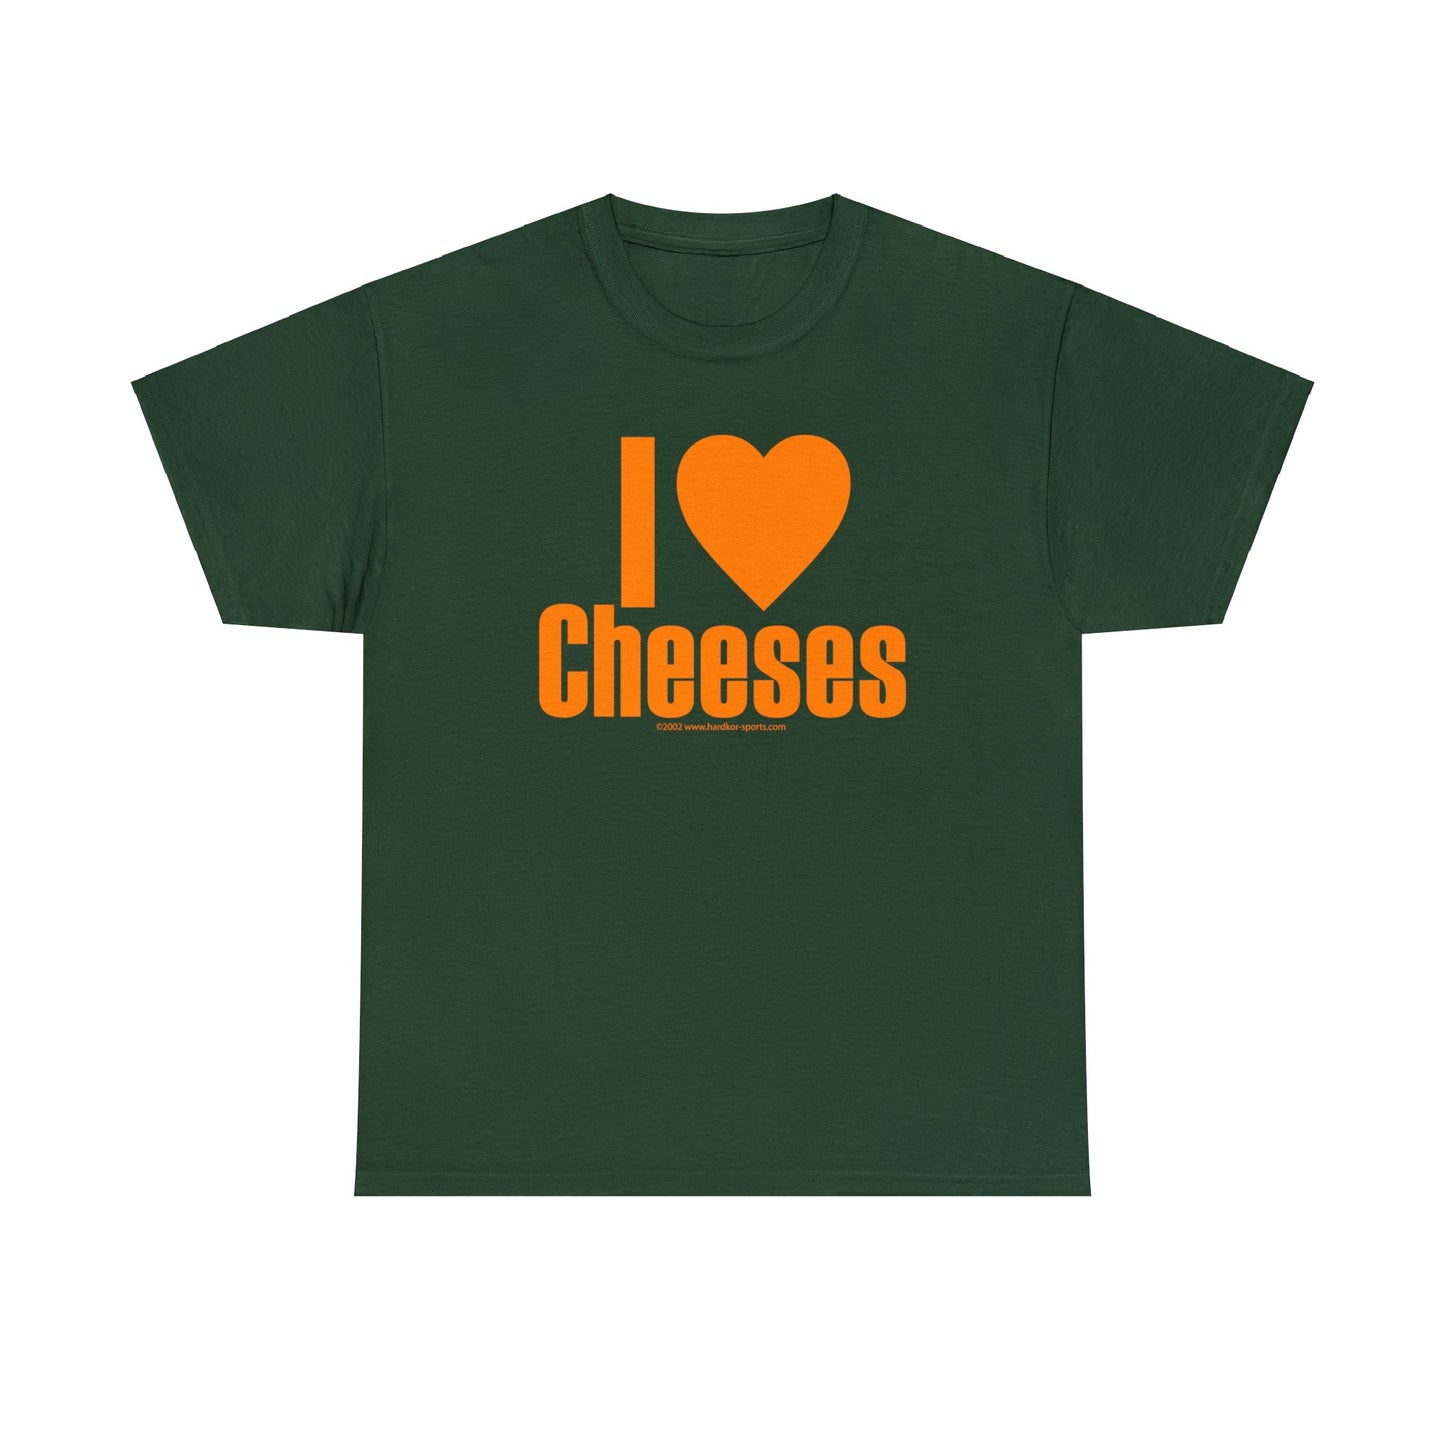 I Love Cheeses, Funny T-Shirt, Cheese Lovers Tee, I Love Jesus Parody, Christianity Spoof, Unisex Heavy Cotton Tee, Food T-Shirt,